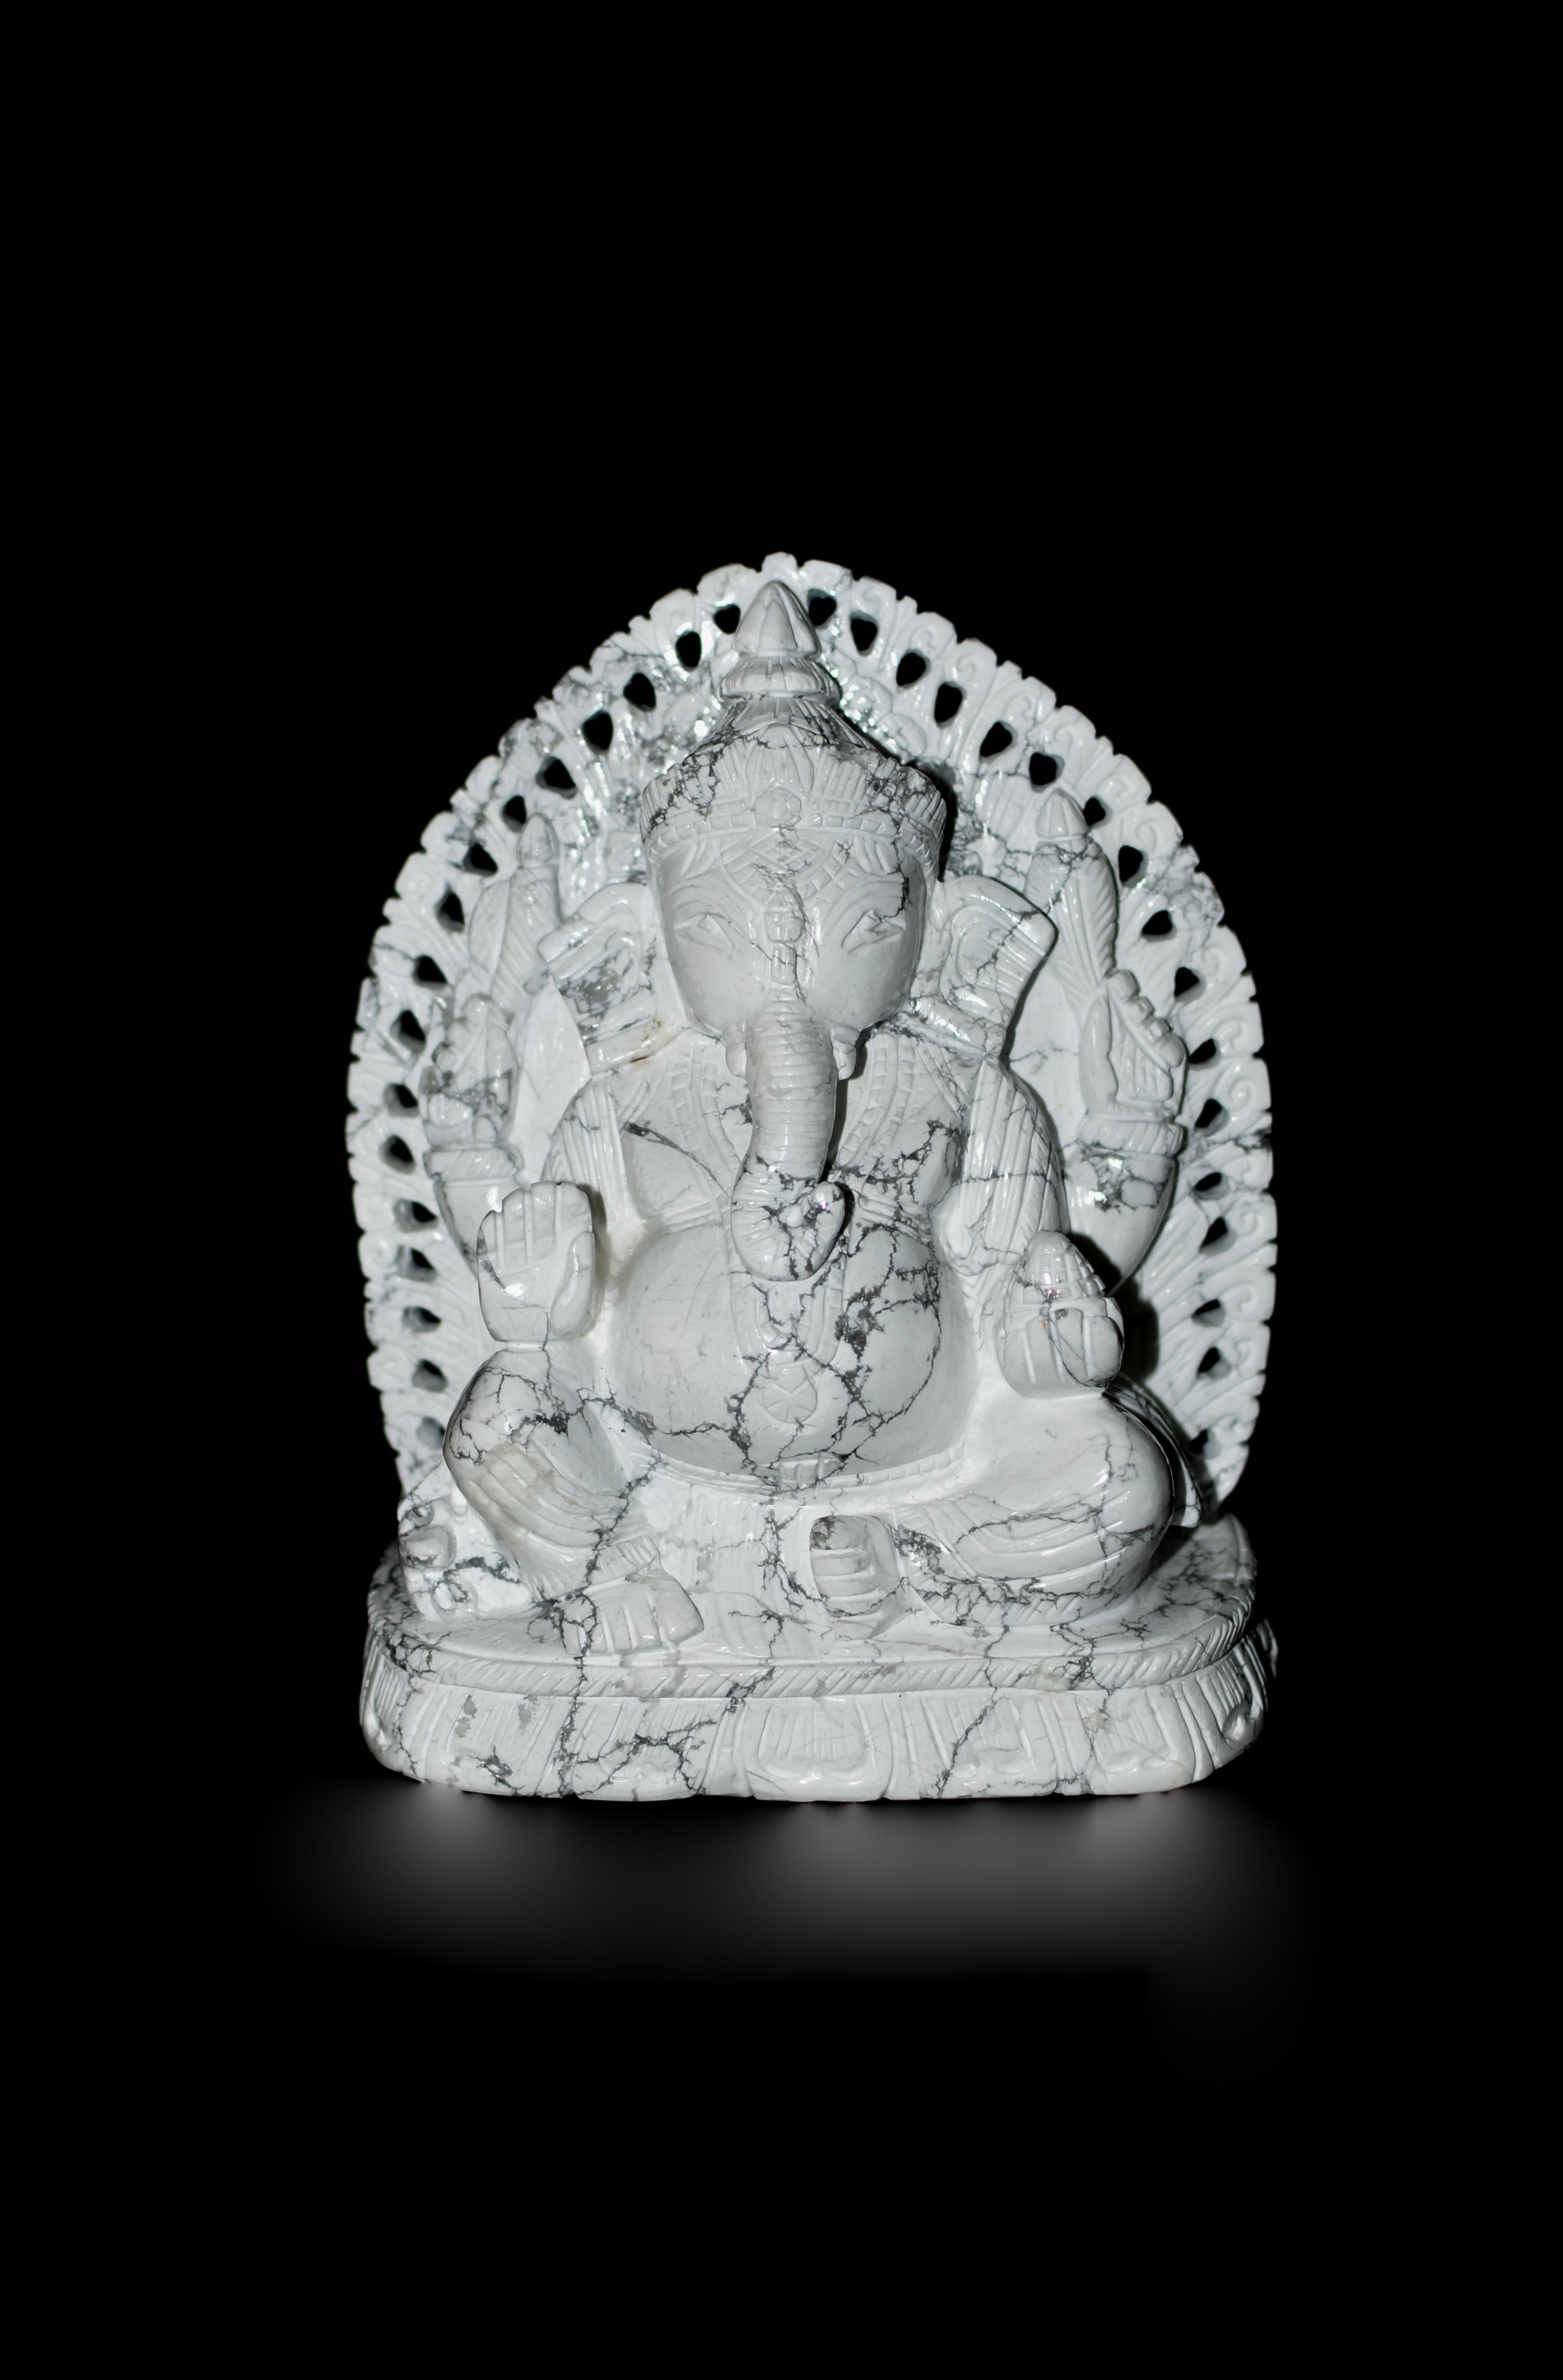 An extraordinary, one of a kind, 7.2 lb gemstone Howlite sculpture of Ganesh, crafted from the finest, rare, all-natural Howlite gemstone. Each detail meticulously rendered, hand-carved and polished, this sculpture brings to life the divine presence